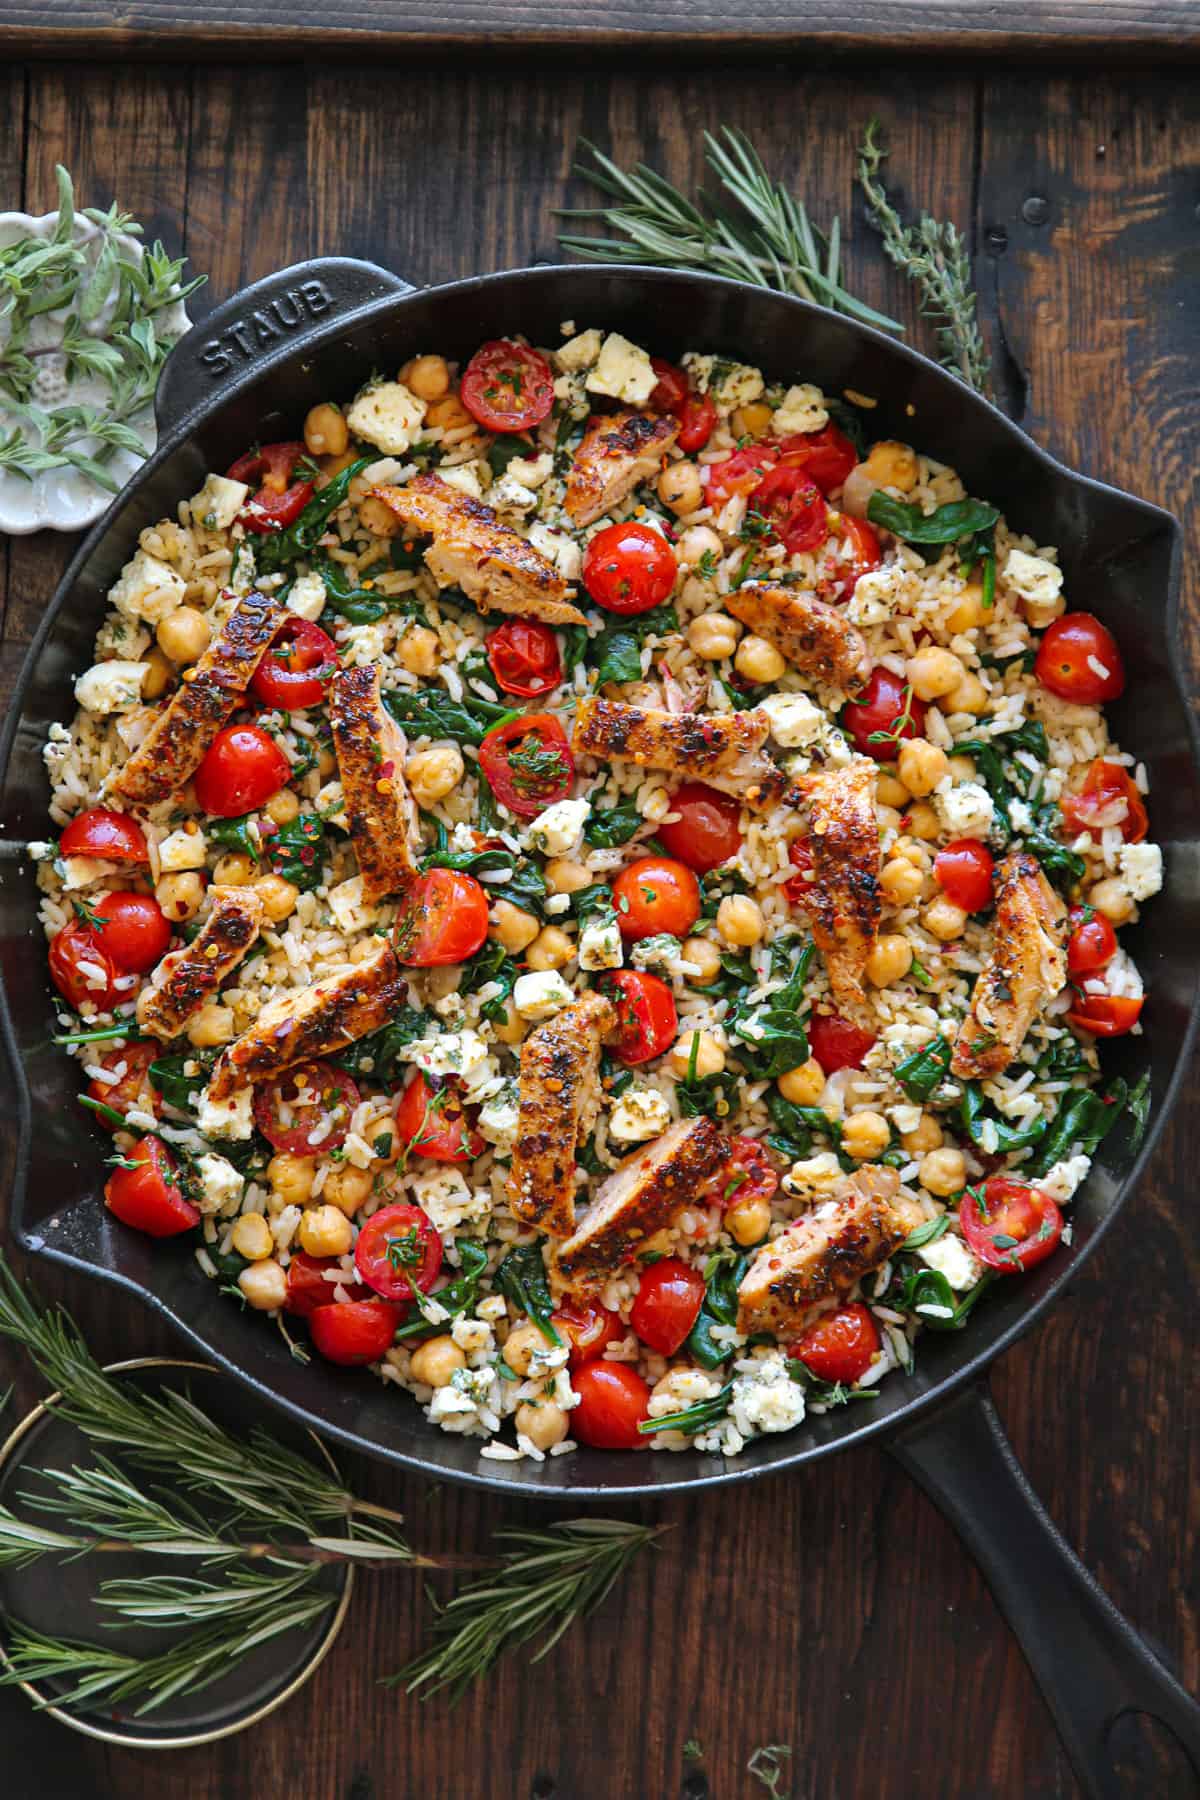 Greek Chicken and Lemon Rice with spinach, grape tomatoes, chickpeas, and feta cheese - in a cast iron skillet.